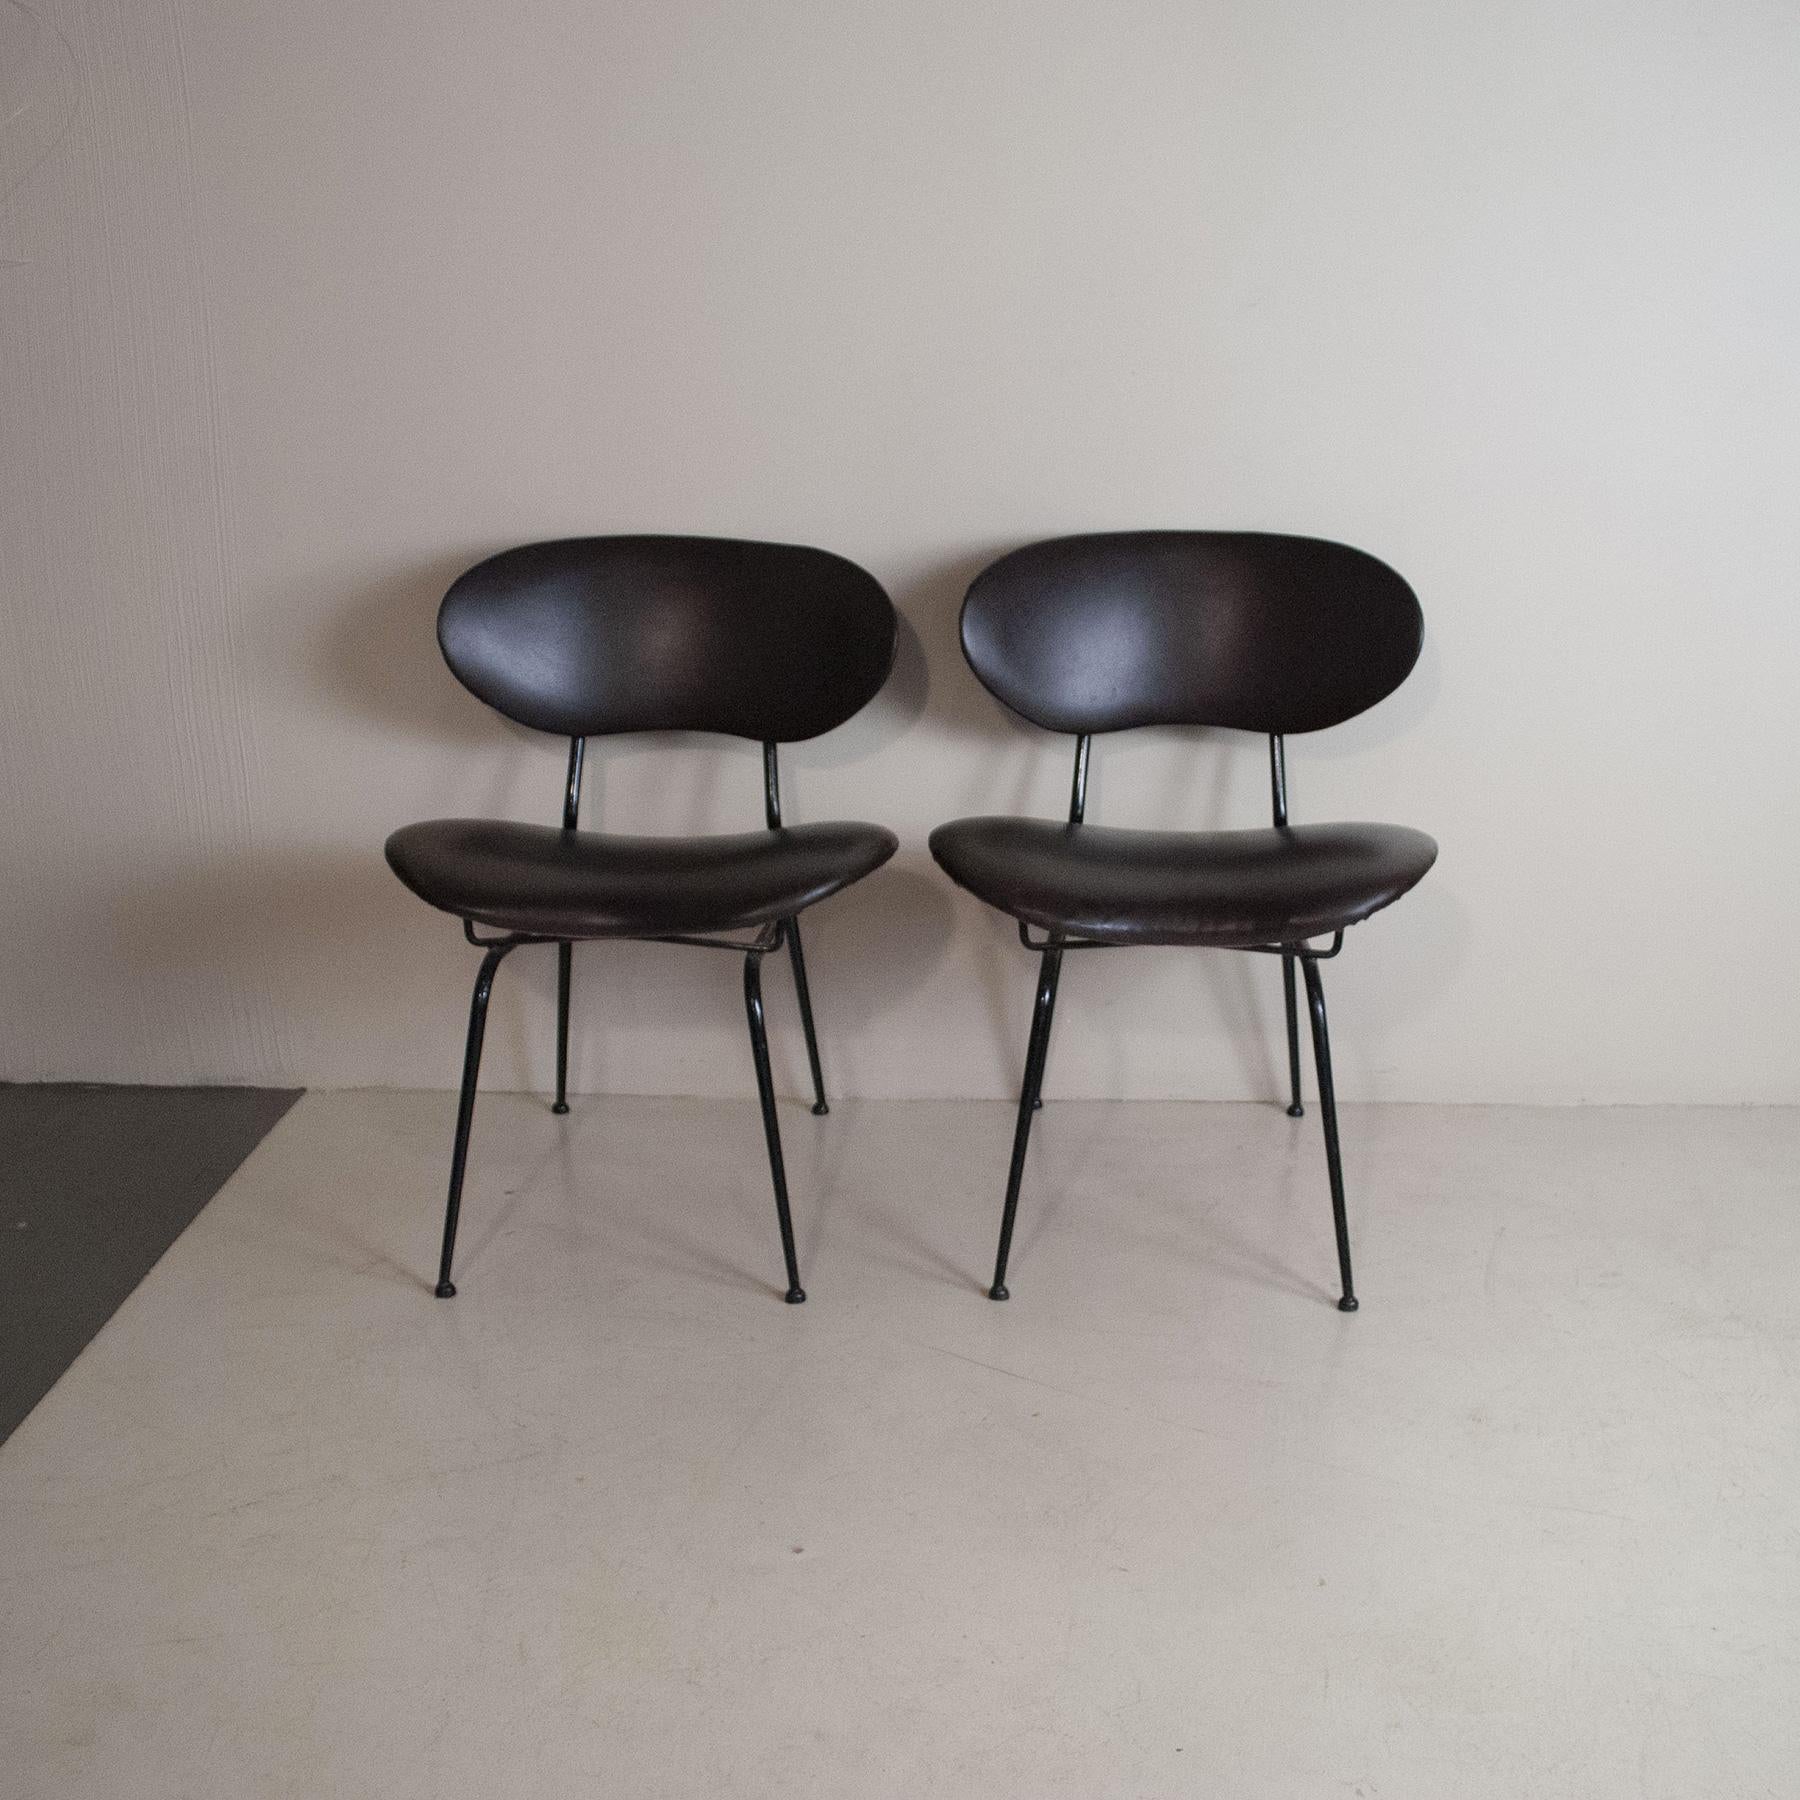 Leather BBPR in the style Italian midcentury set of two chairs from the sixties